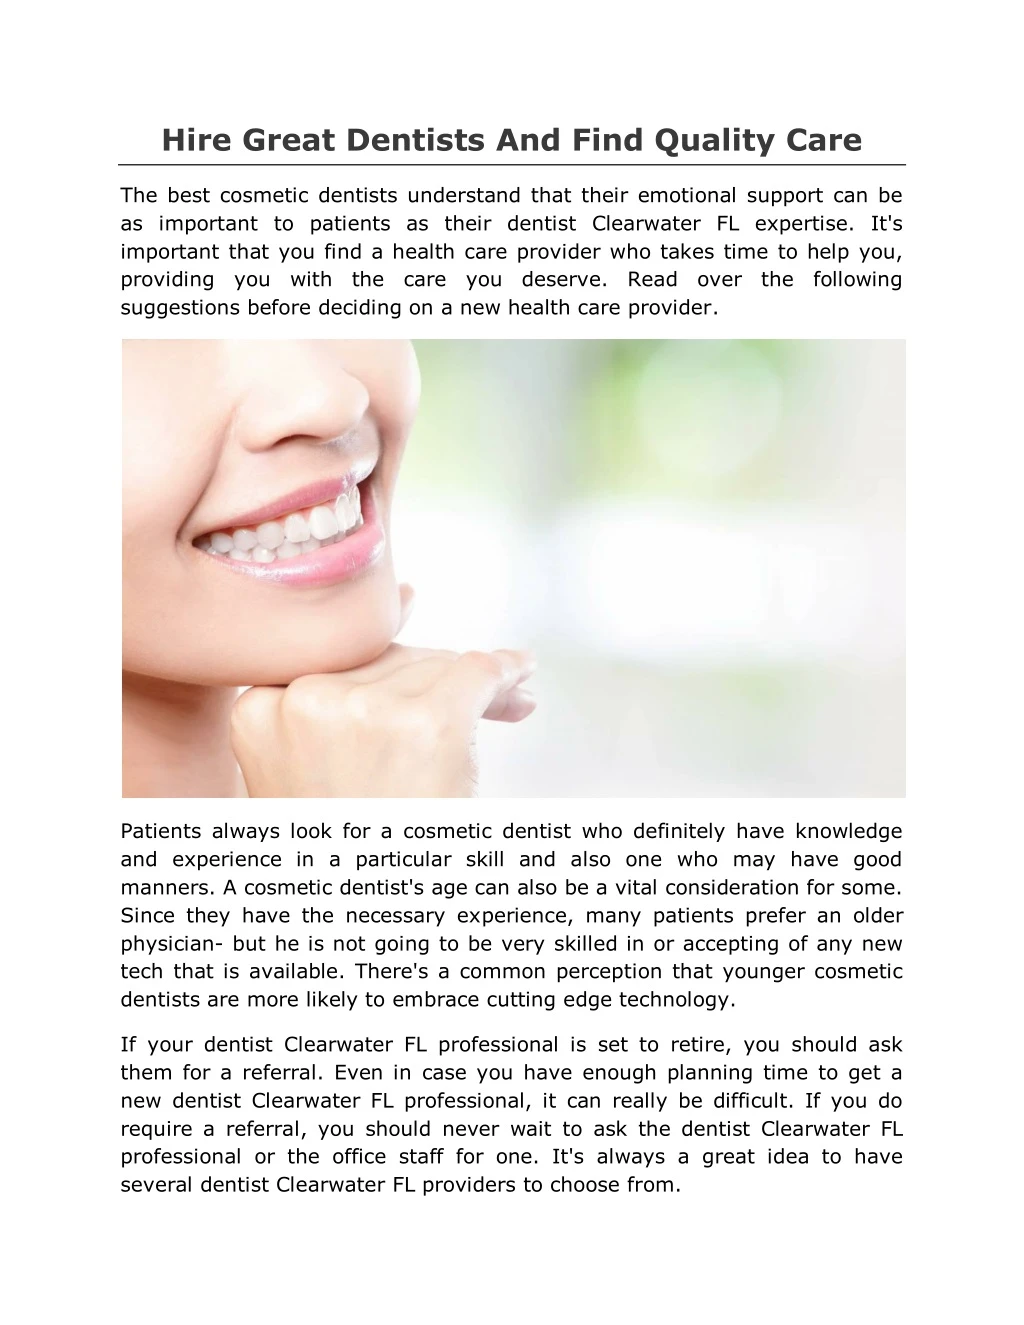 hire great dentists and find quality care